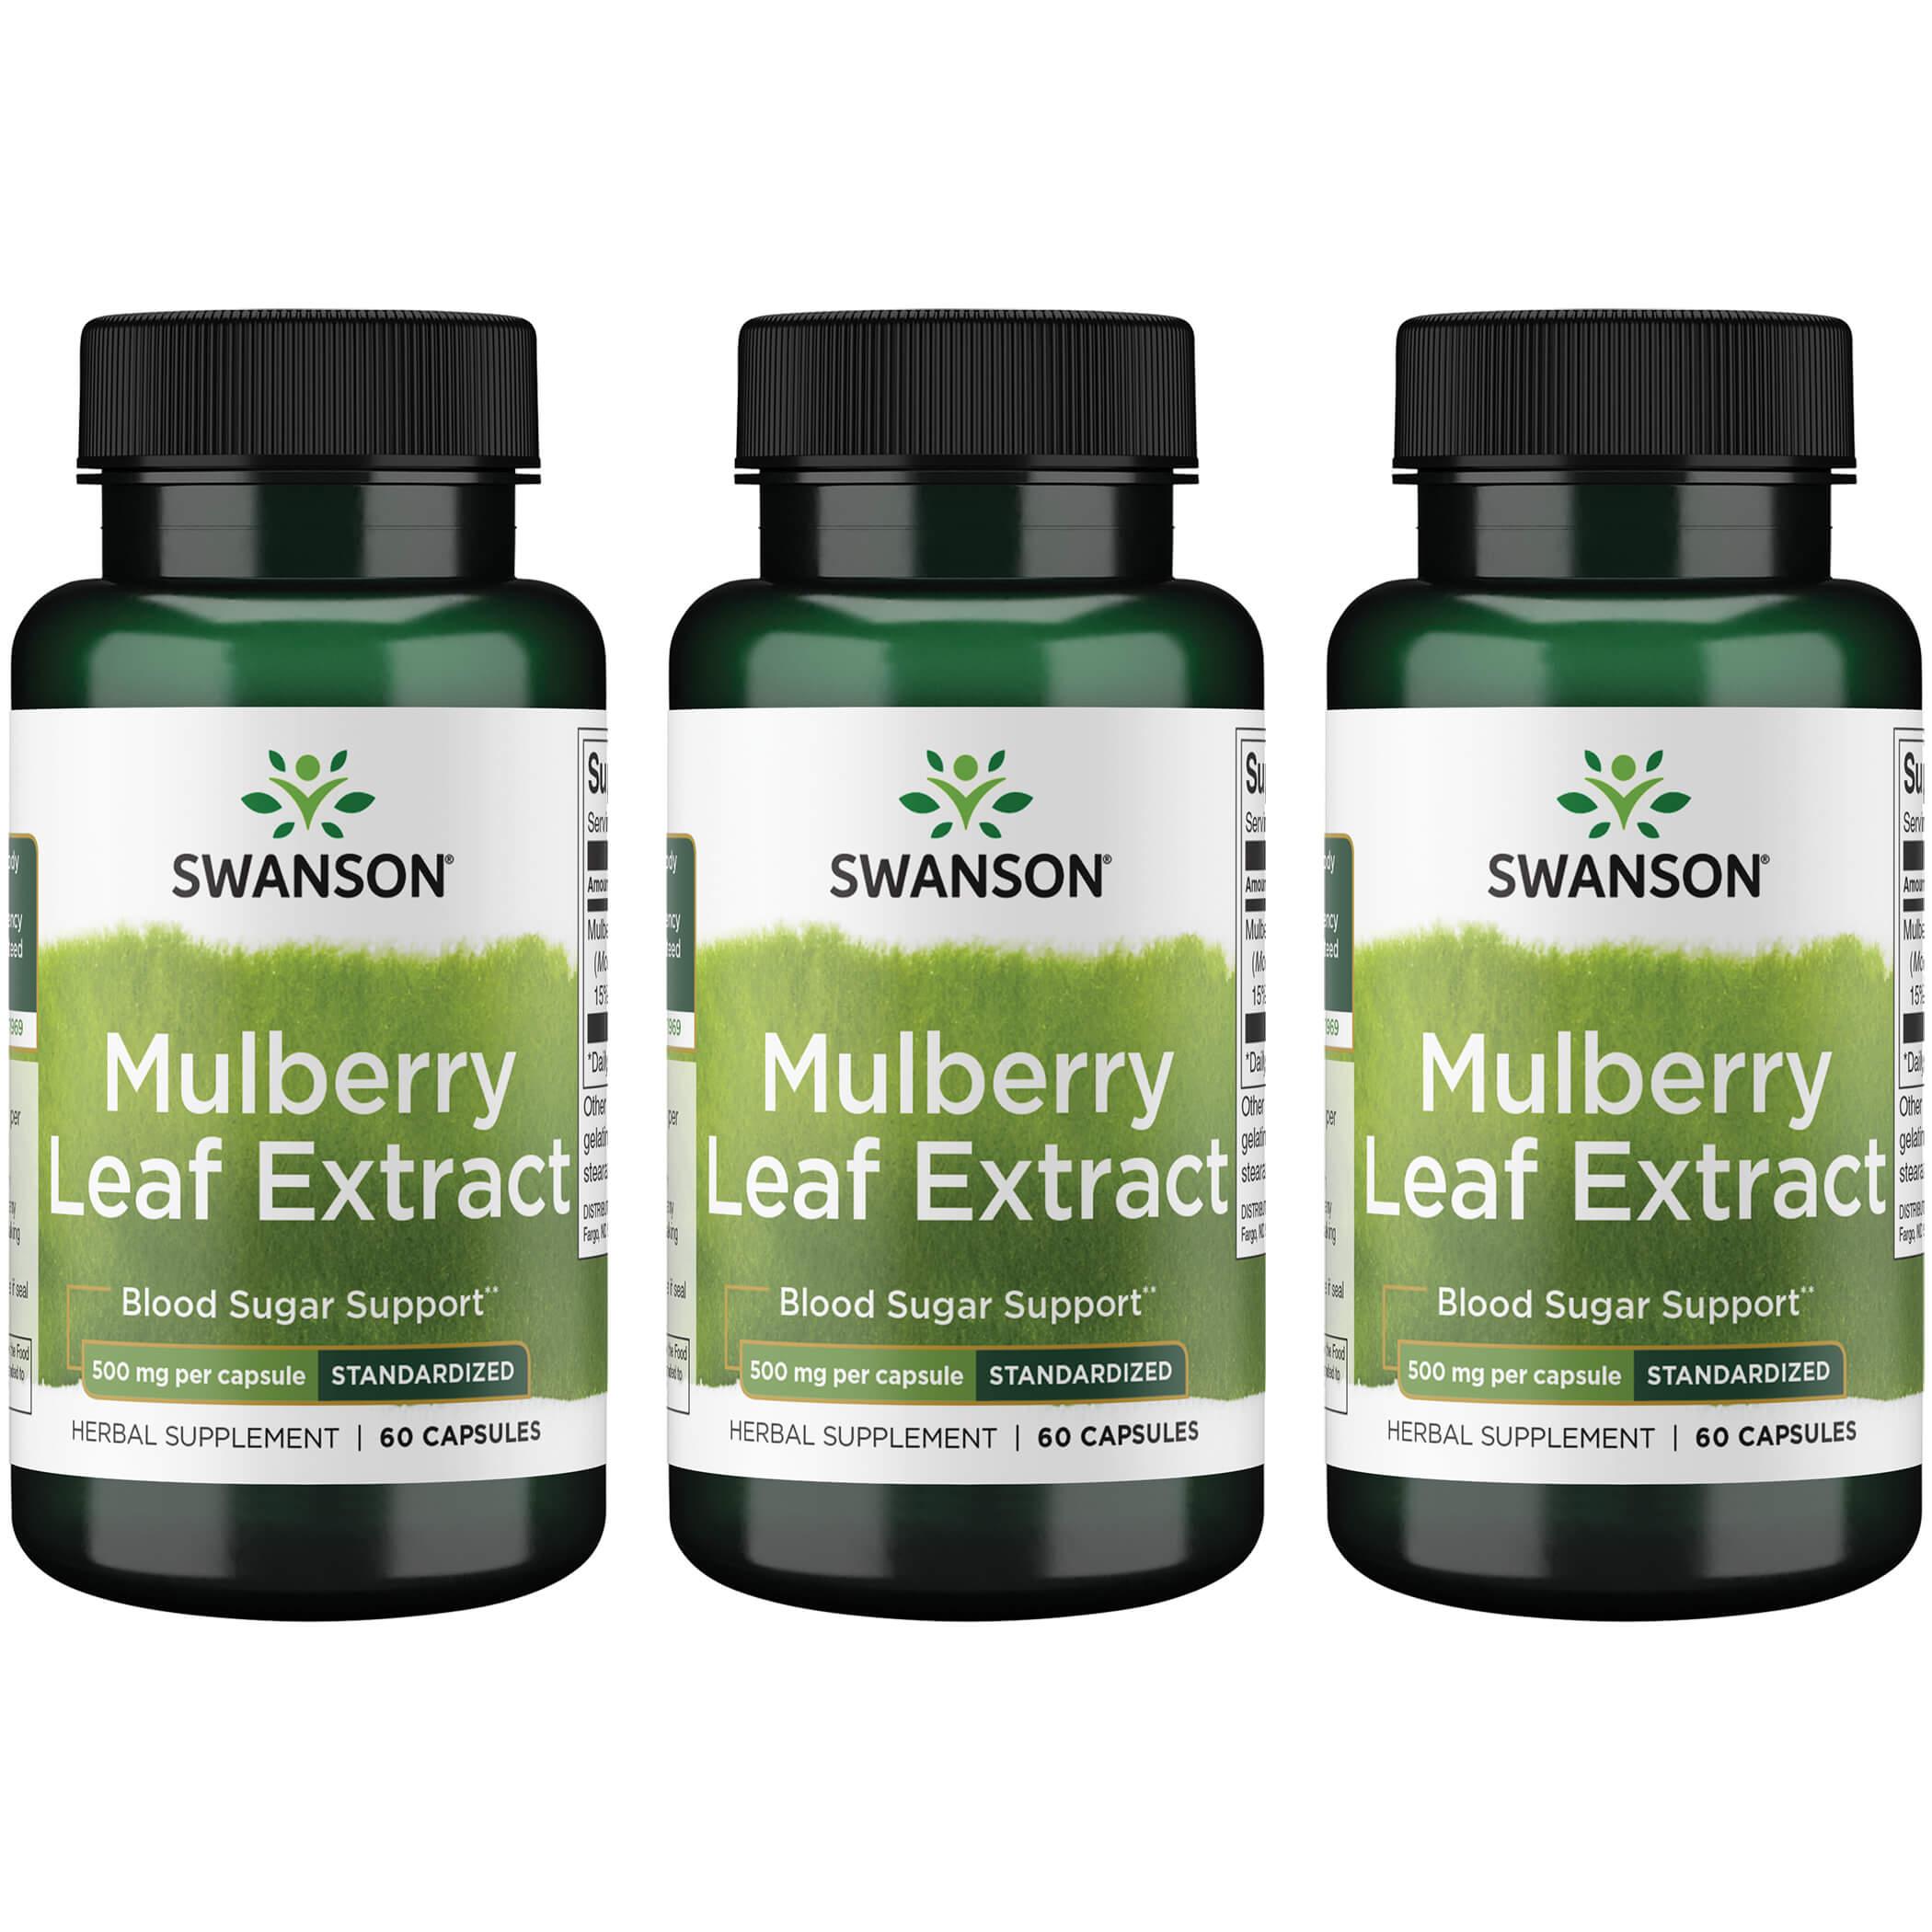 Swanson Superior Herbs Mulberry Leaf Extract - Standardized 3 Pack Vitamin 500 mg 60 Caps